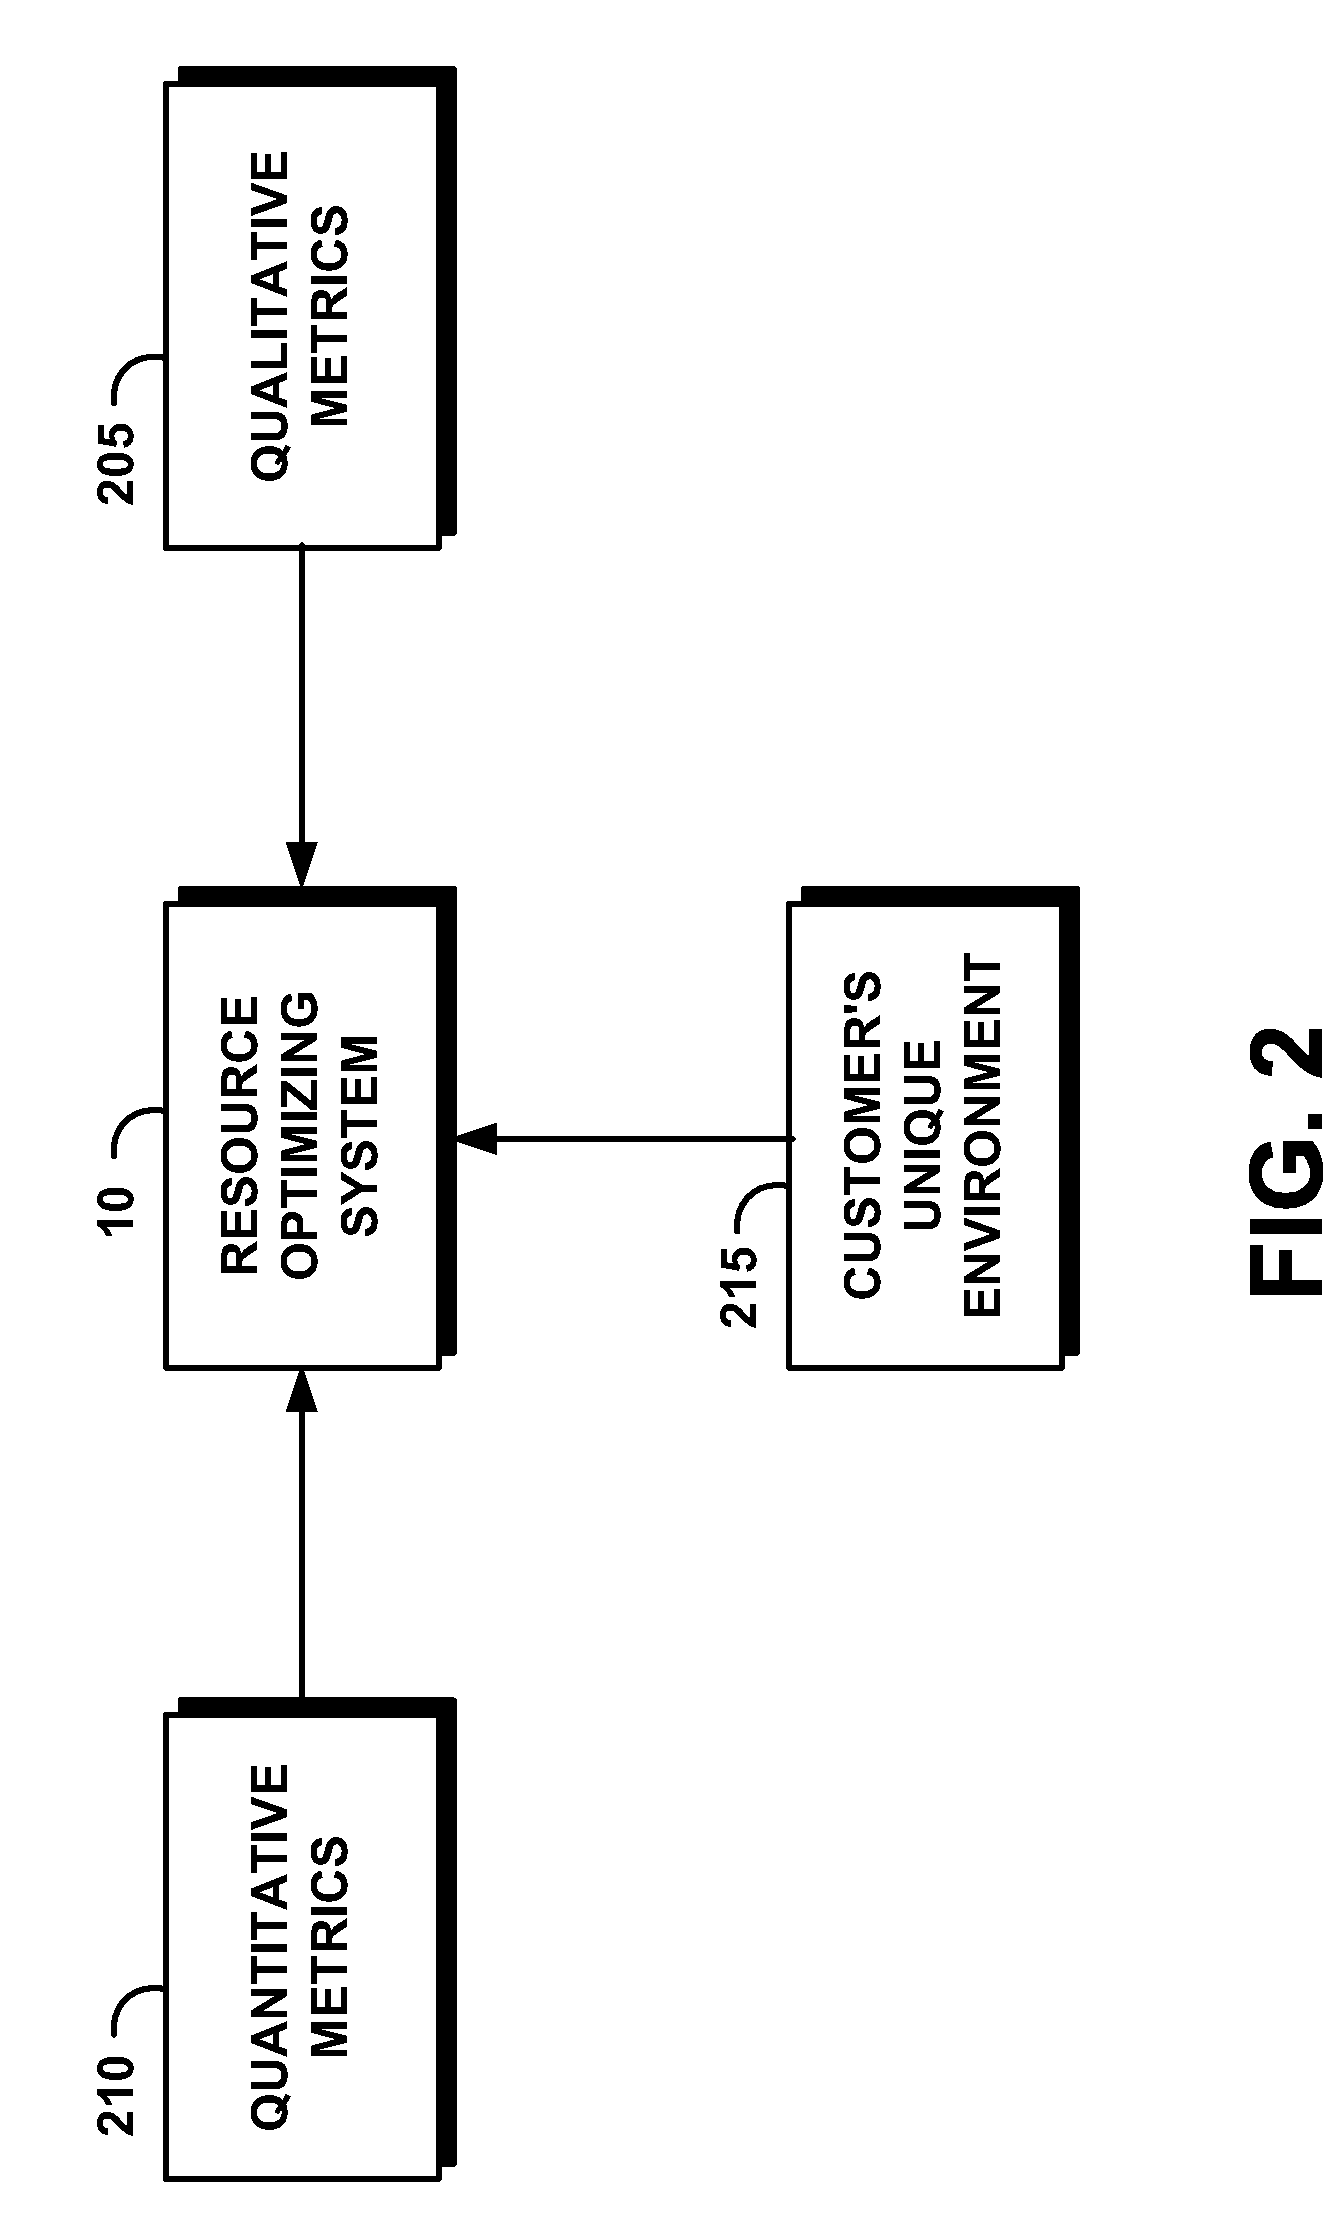 System and method for automatically and dynamically optimizing application data resources to meet business objectives